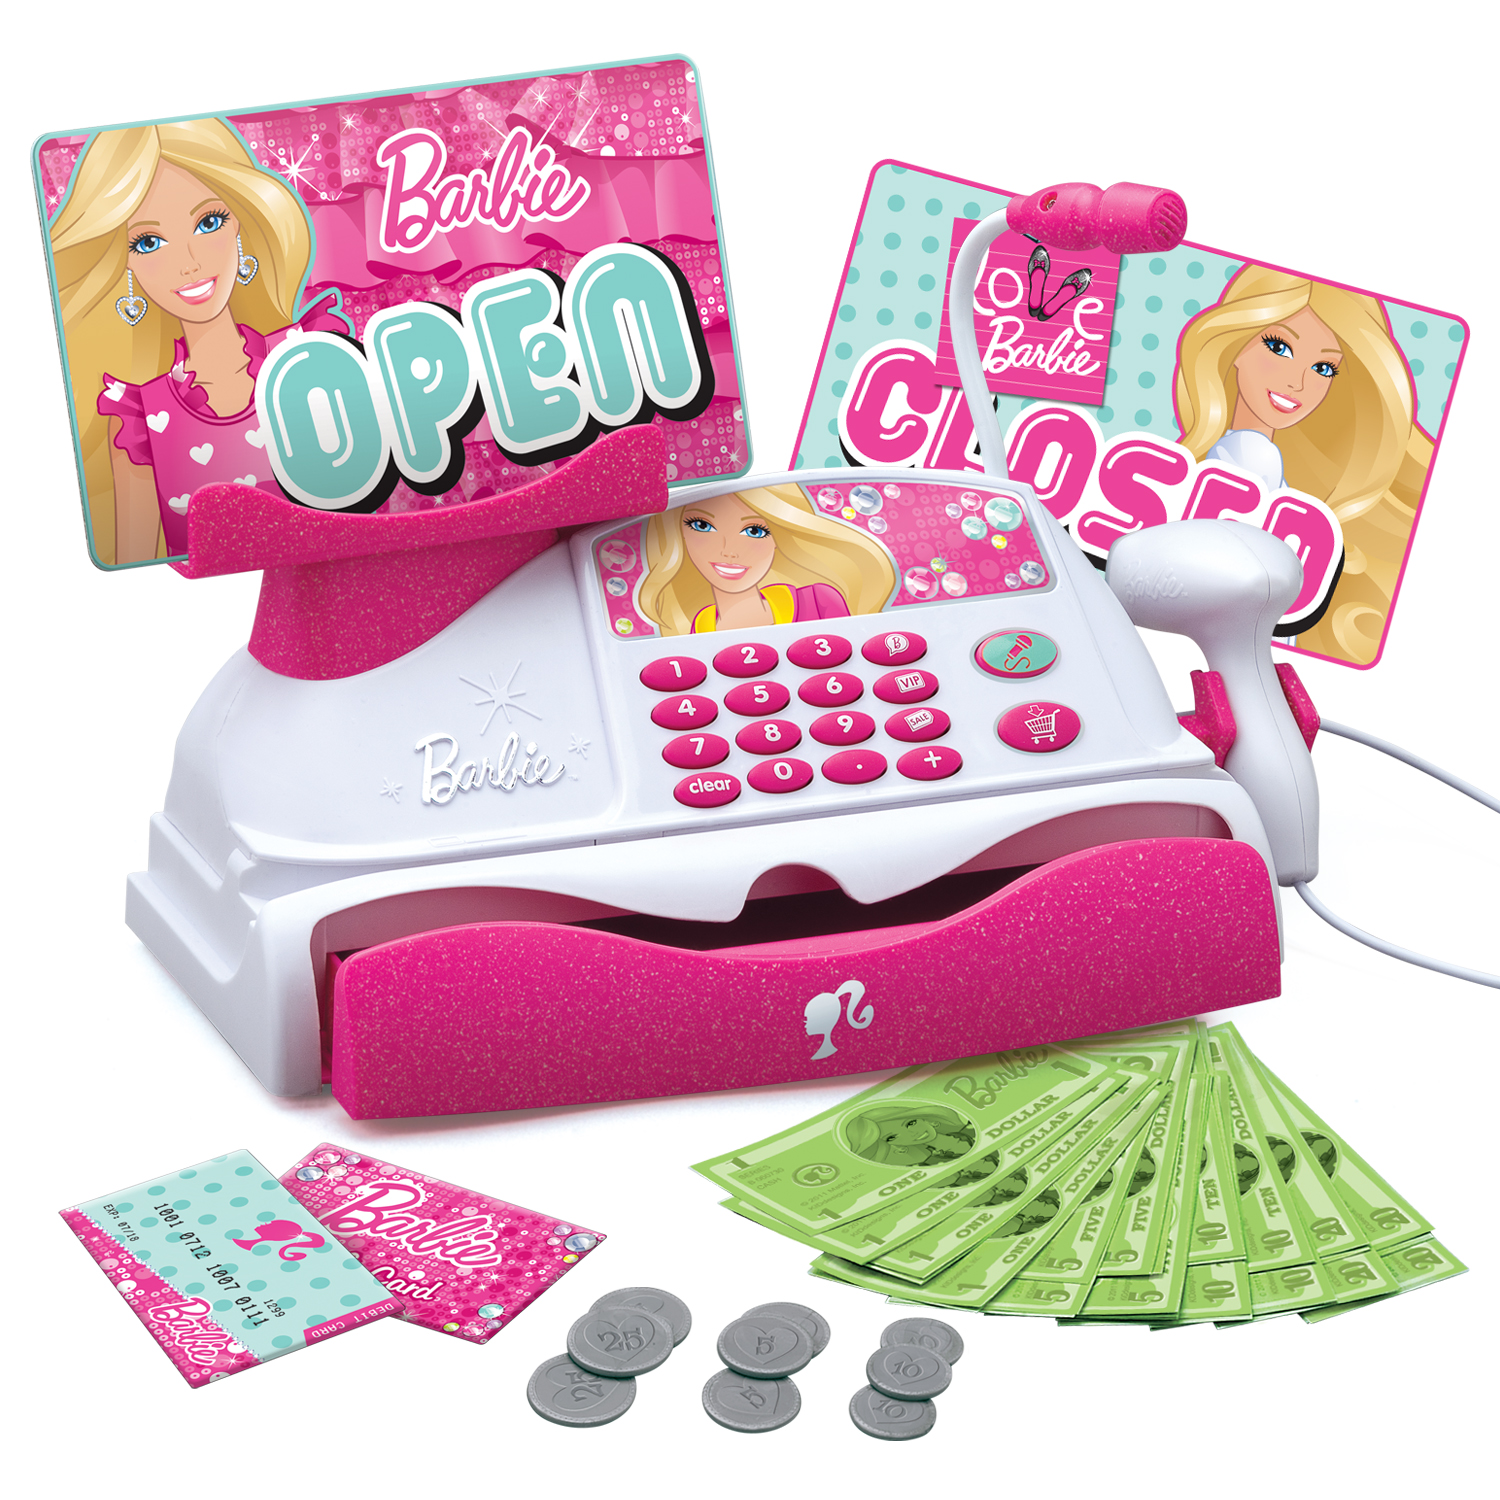 Barbie Cash Register with Card Machine Pretend Play Shop Toy in Pink for Ages 3+ 